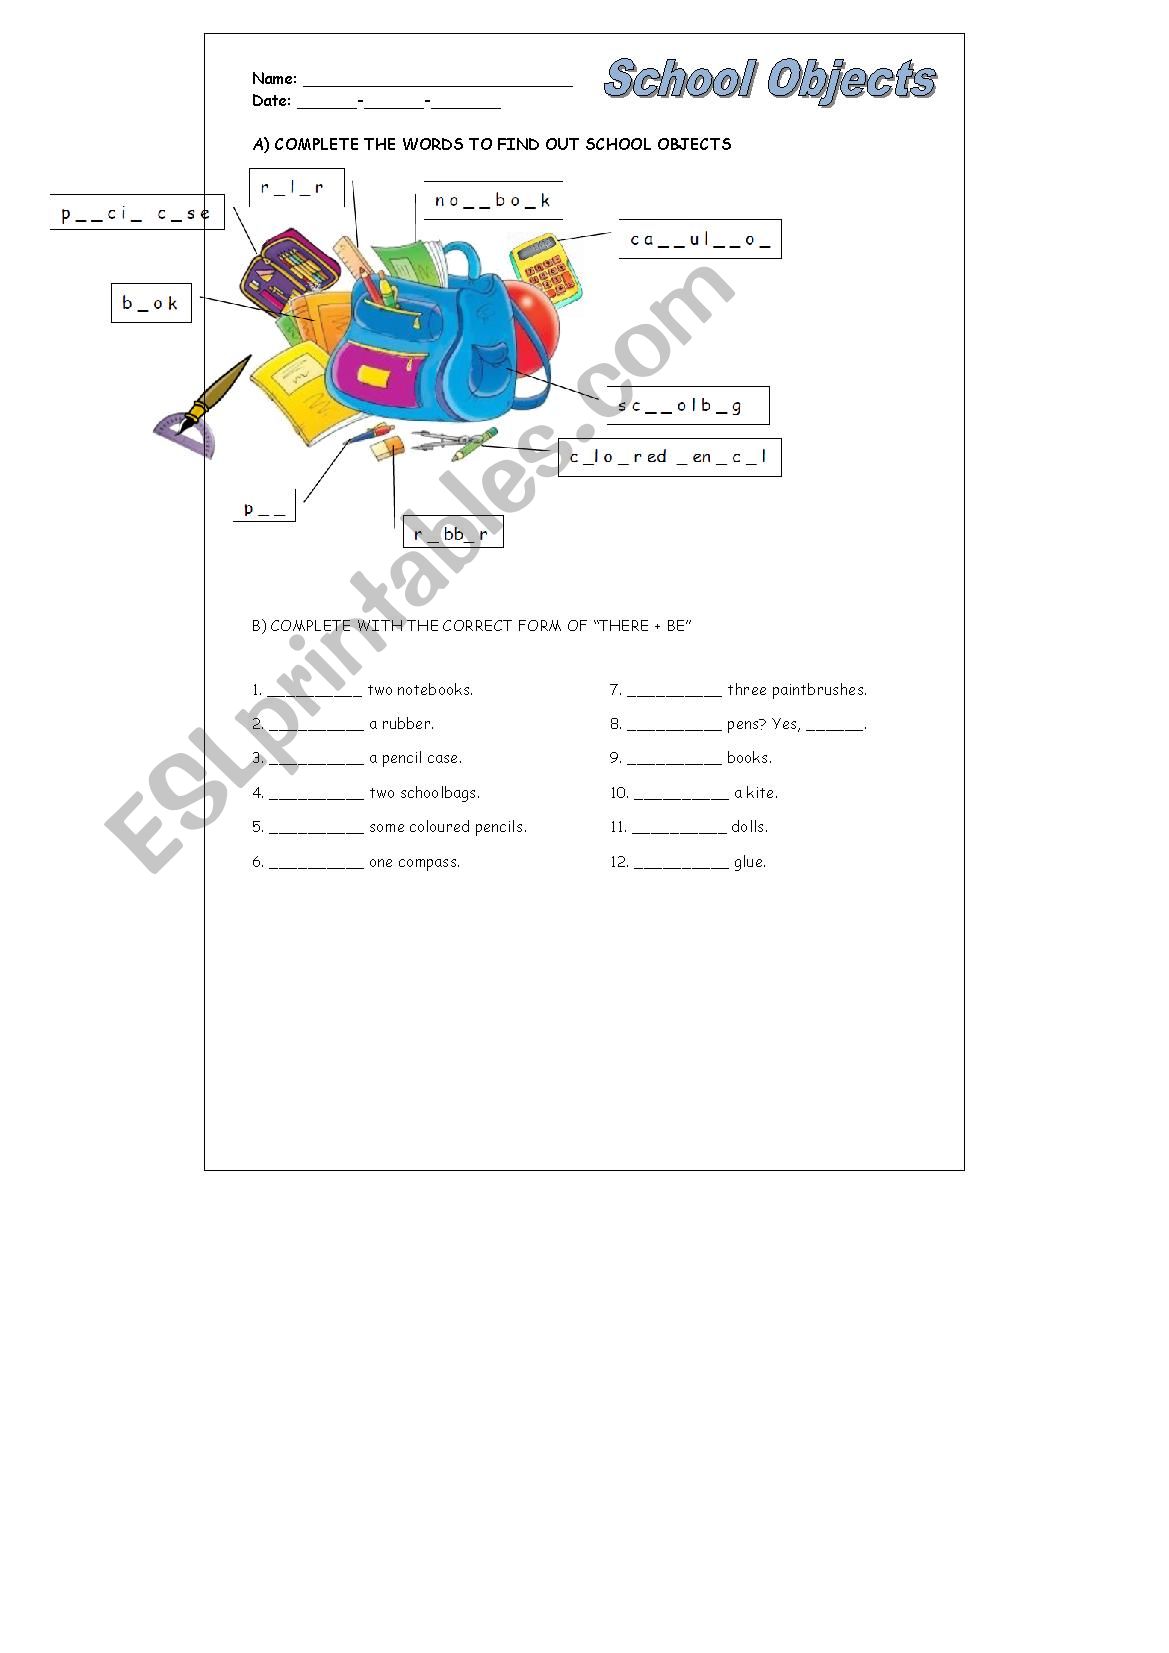 School objects and There be worksheet